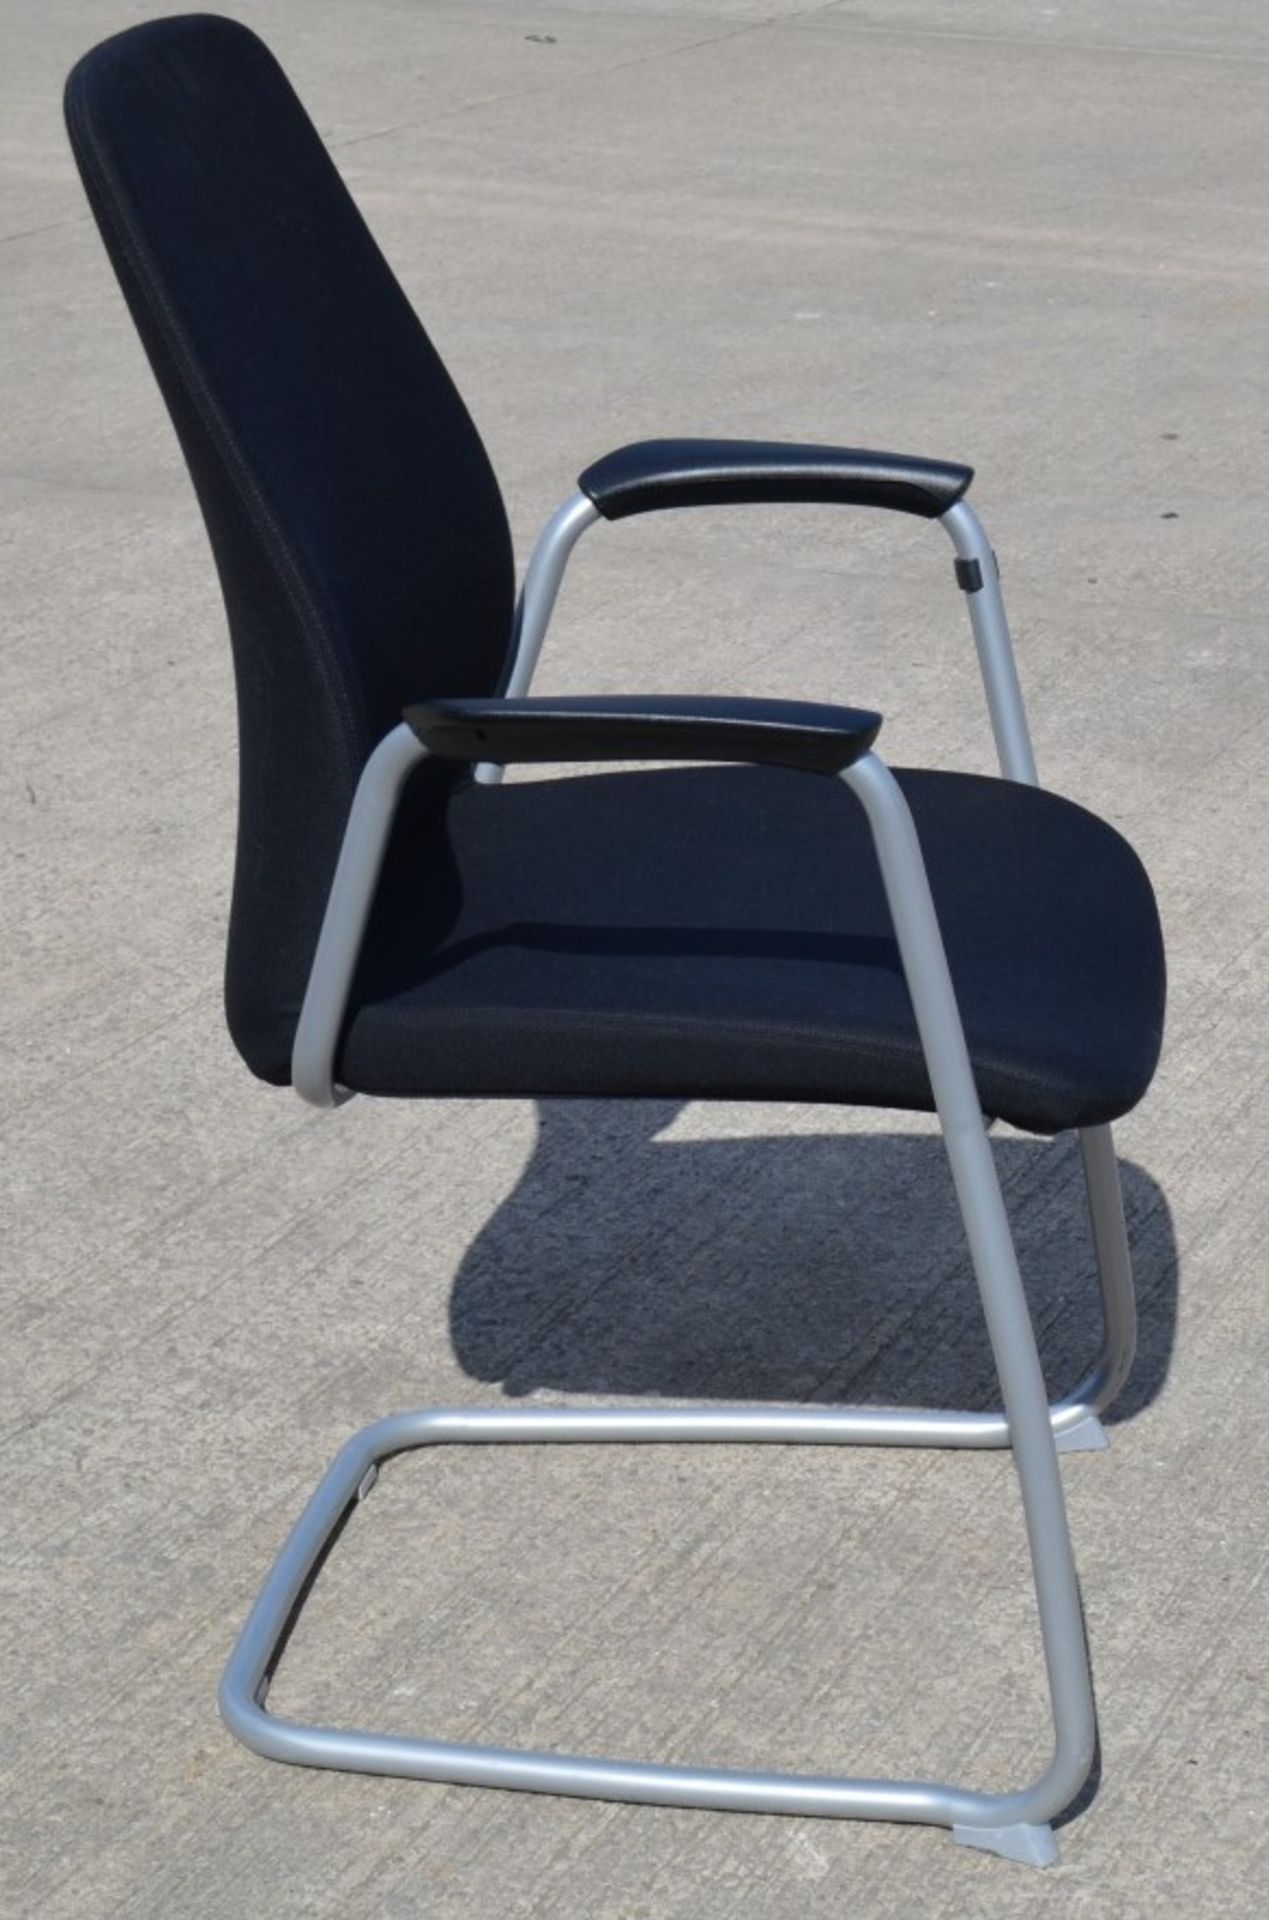 4 x Kinnarps 5000CV Meeting Chairs In Black - Dimensions: W59 x H92 x D53, Seat 45cm - Made In - Image 4 of 7